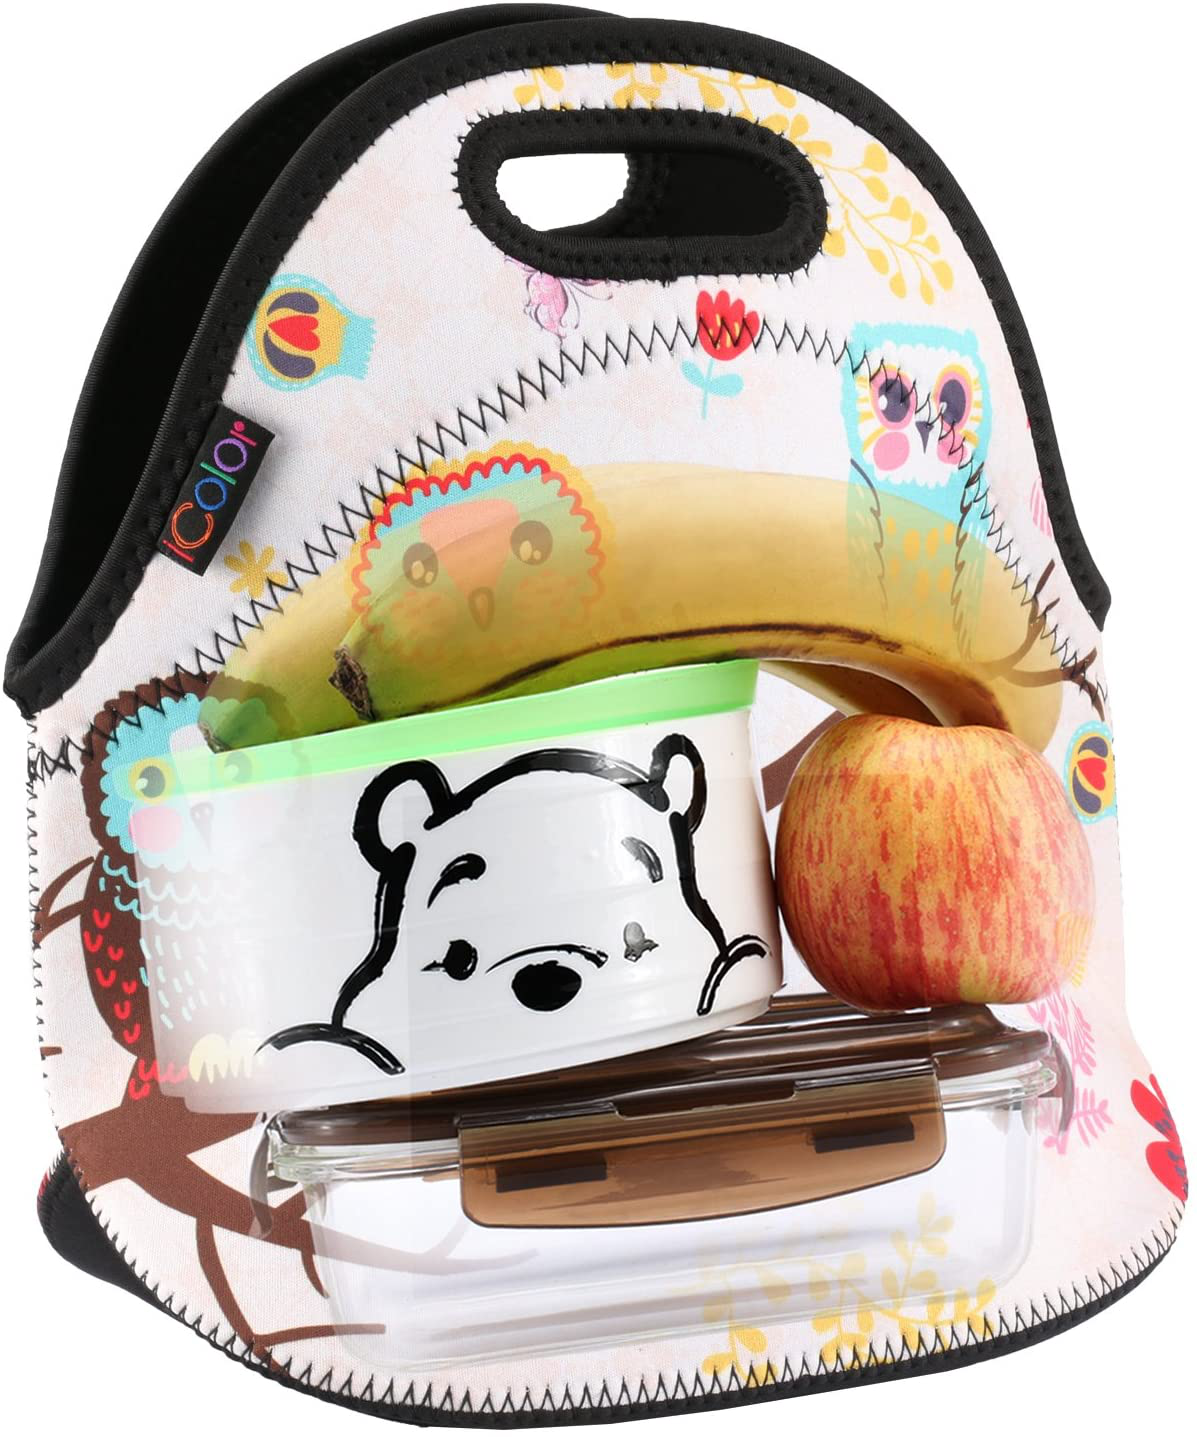 Neoprene Lunch Bag Cat by iColor, Insulated Lunchbo Thermal Lunch Tote Bag Water Resistant Lunch Box & Food Container Great for Travel, Outdoors,Work & More Food Storage Cooler